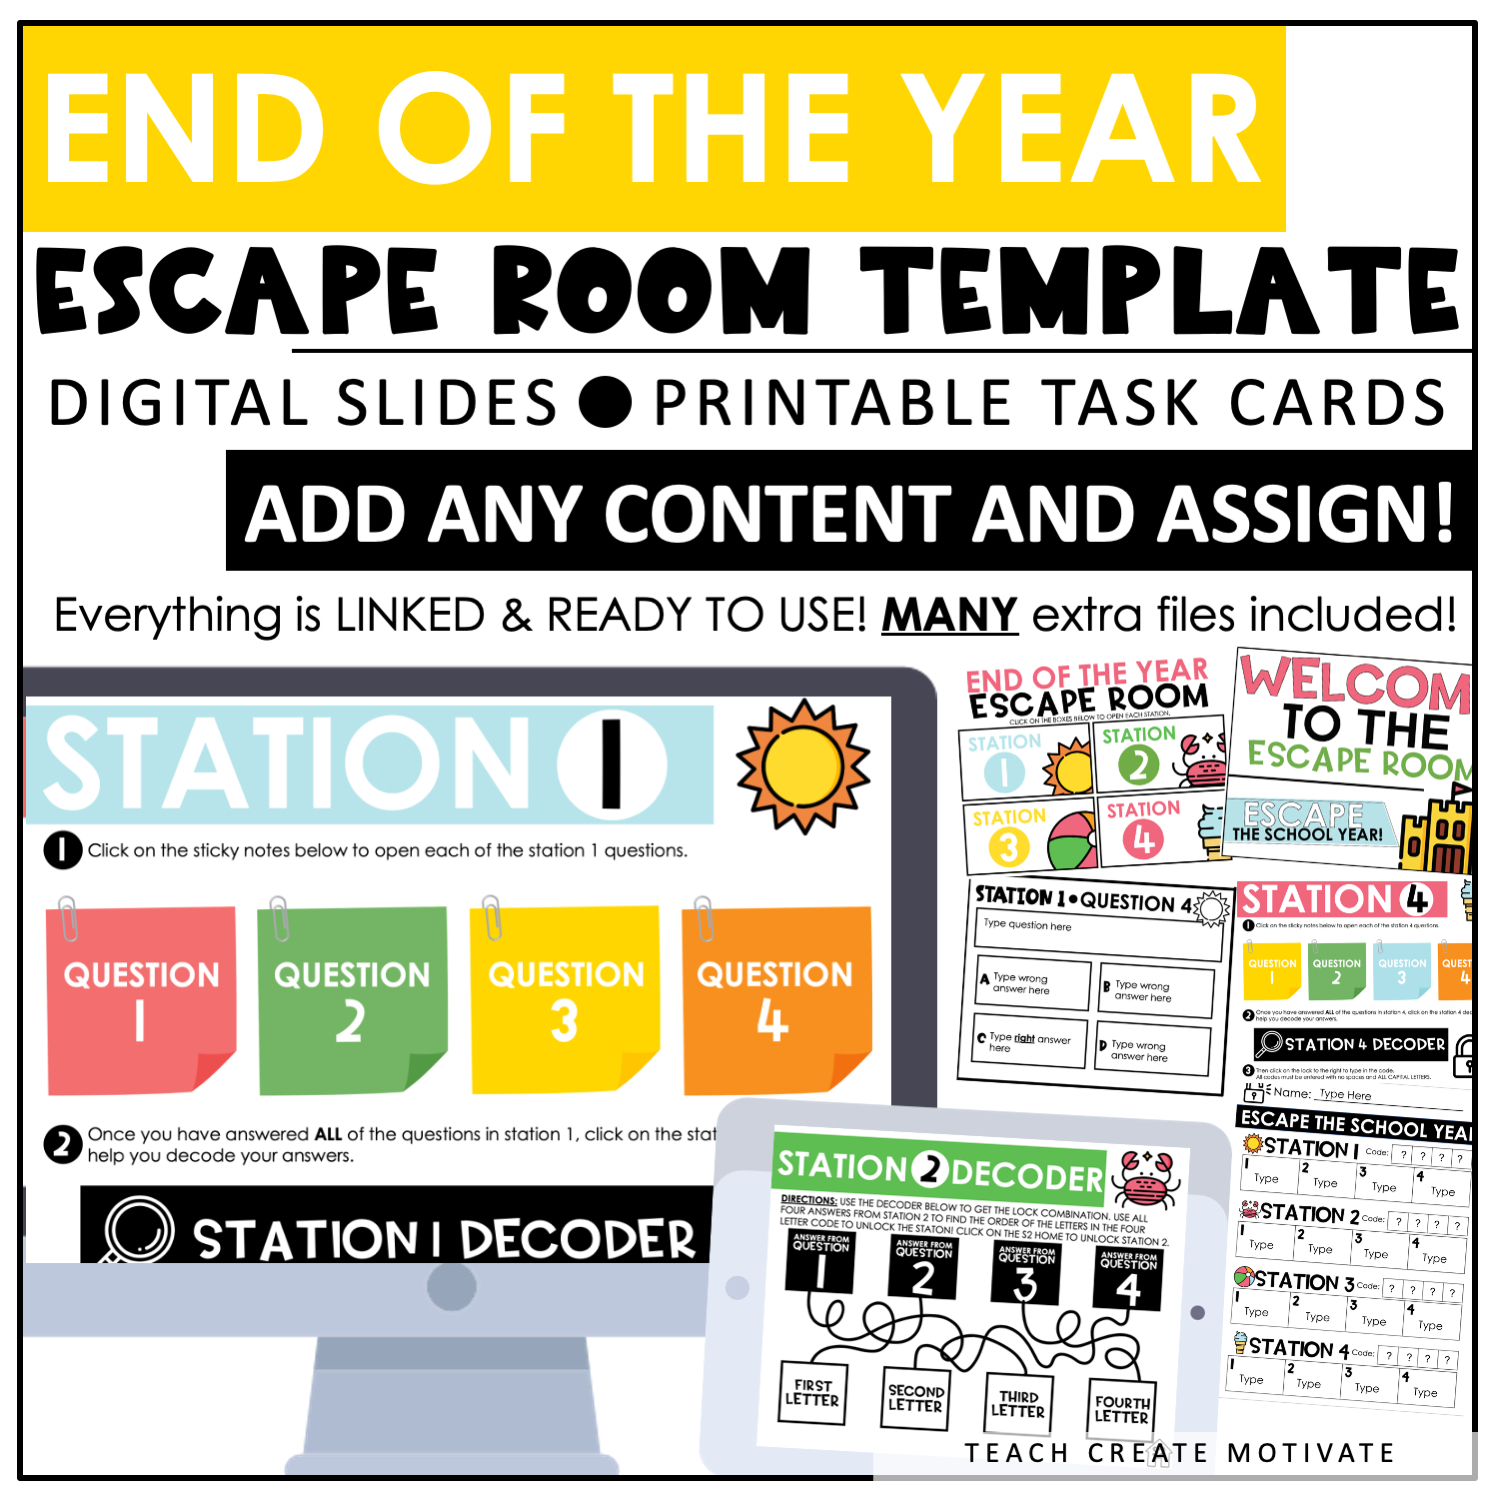 End of the Year Escape Room Template  Printable Task Cards Within Task Cards Template